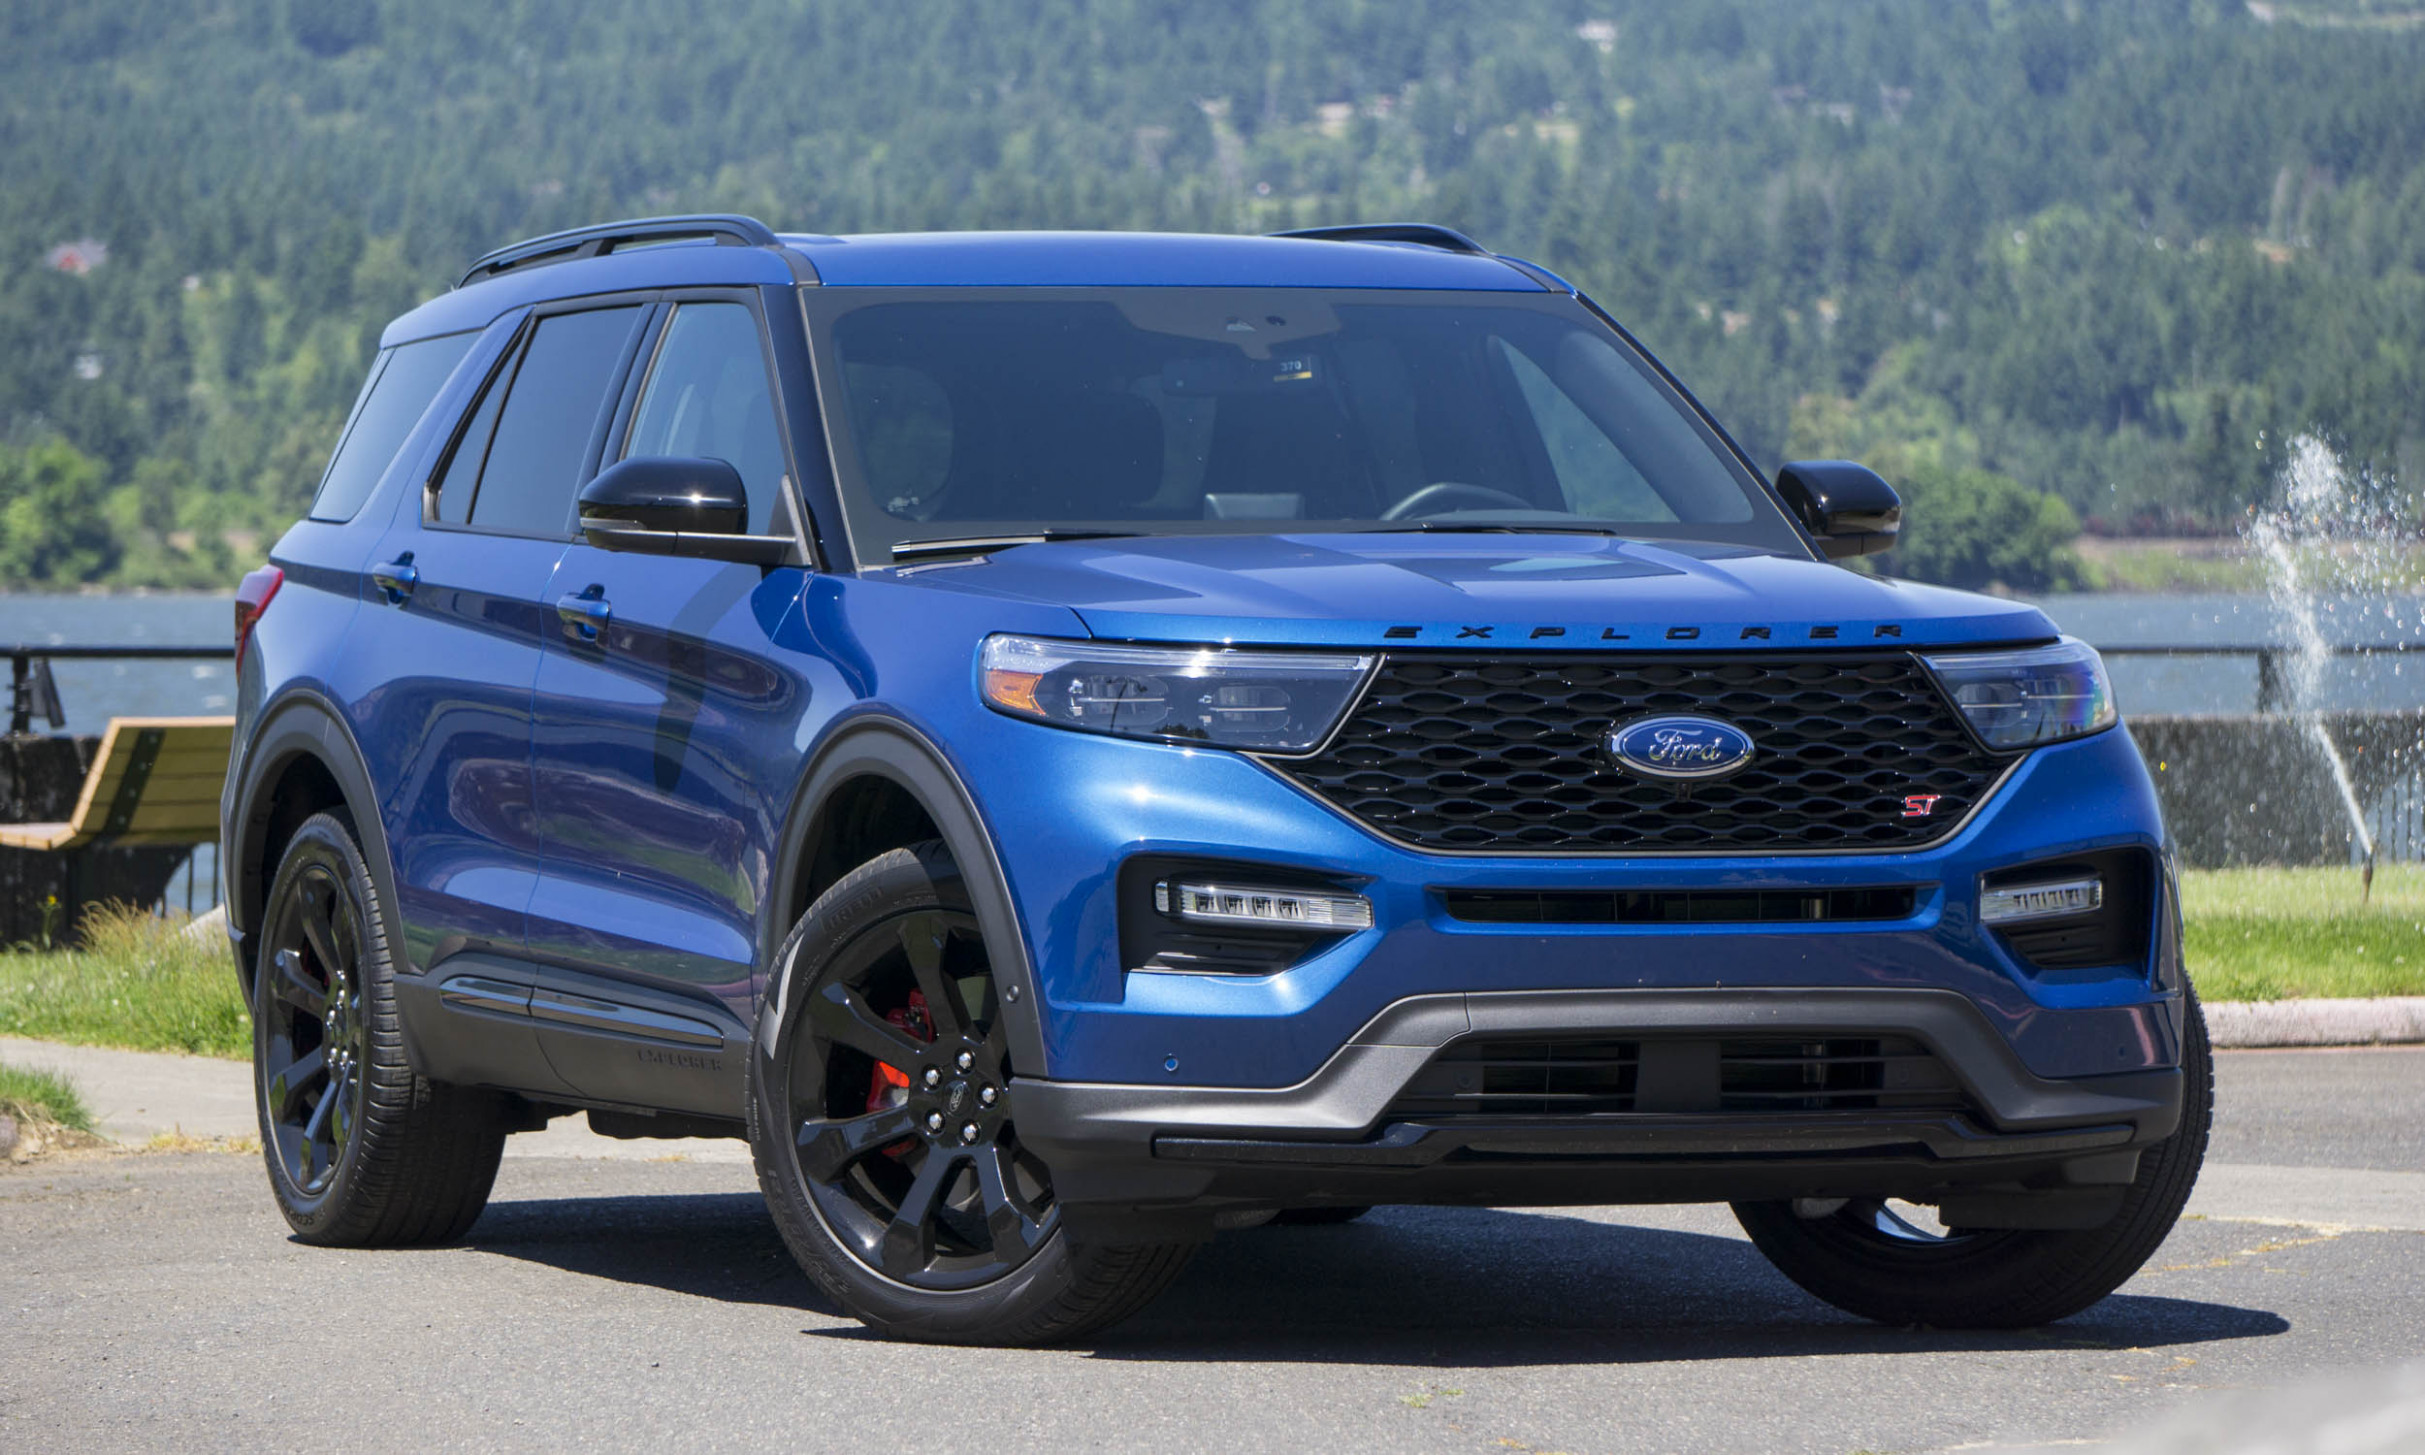 Configurations When Does The 2022 Ford Explorer Come Out